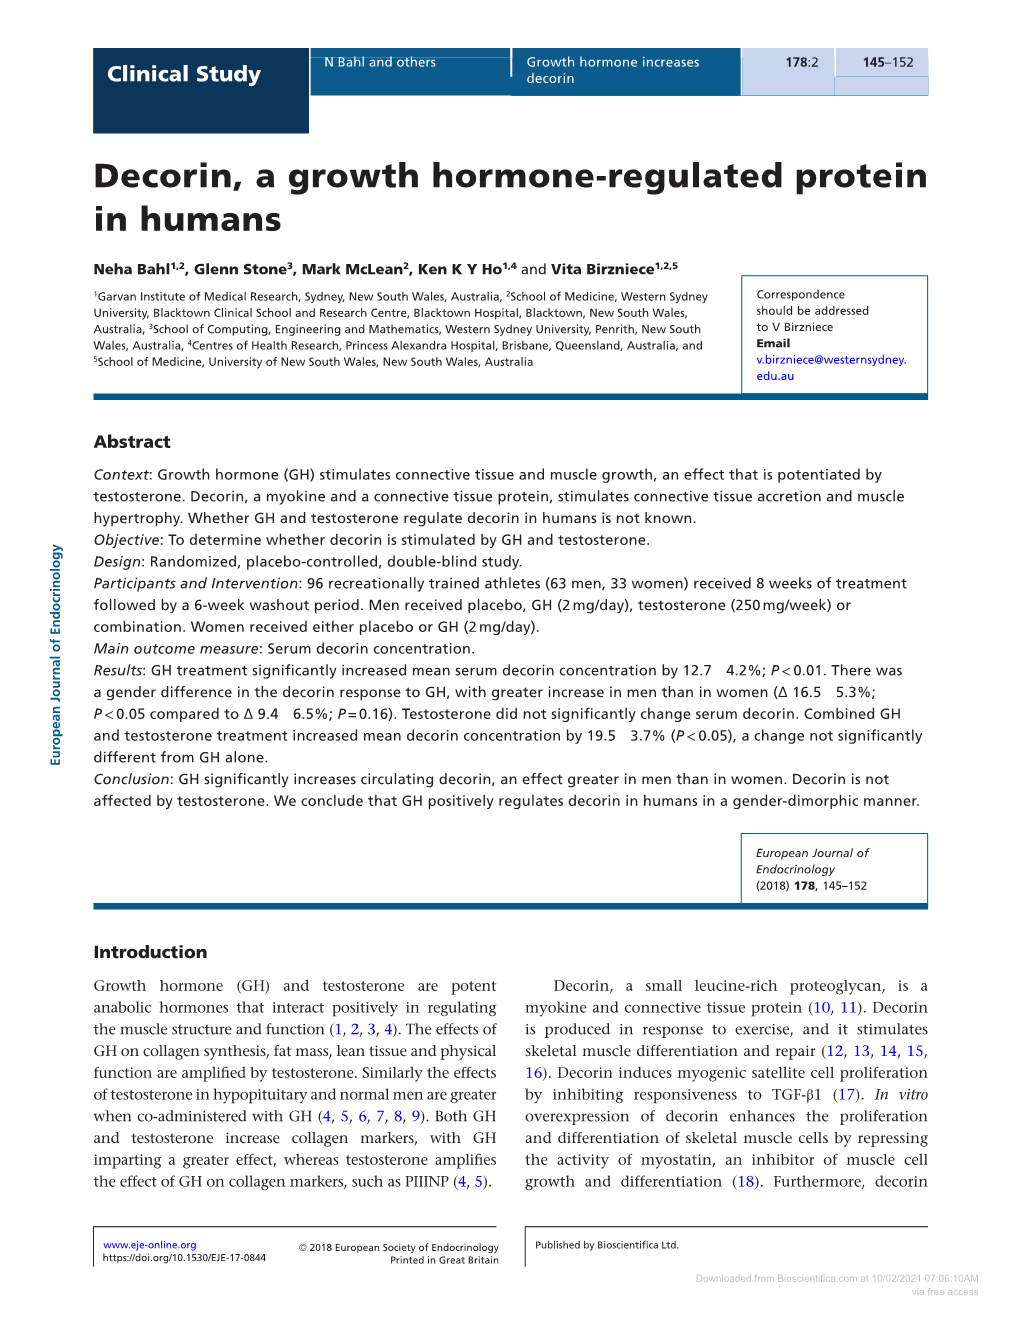 Decorin, a Growth Hormone-Regulated Protein in Humans